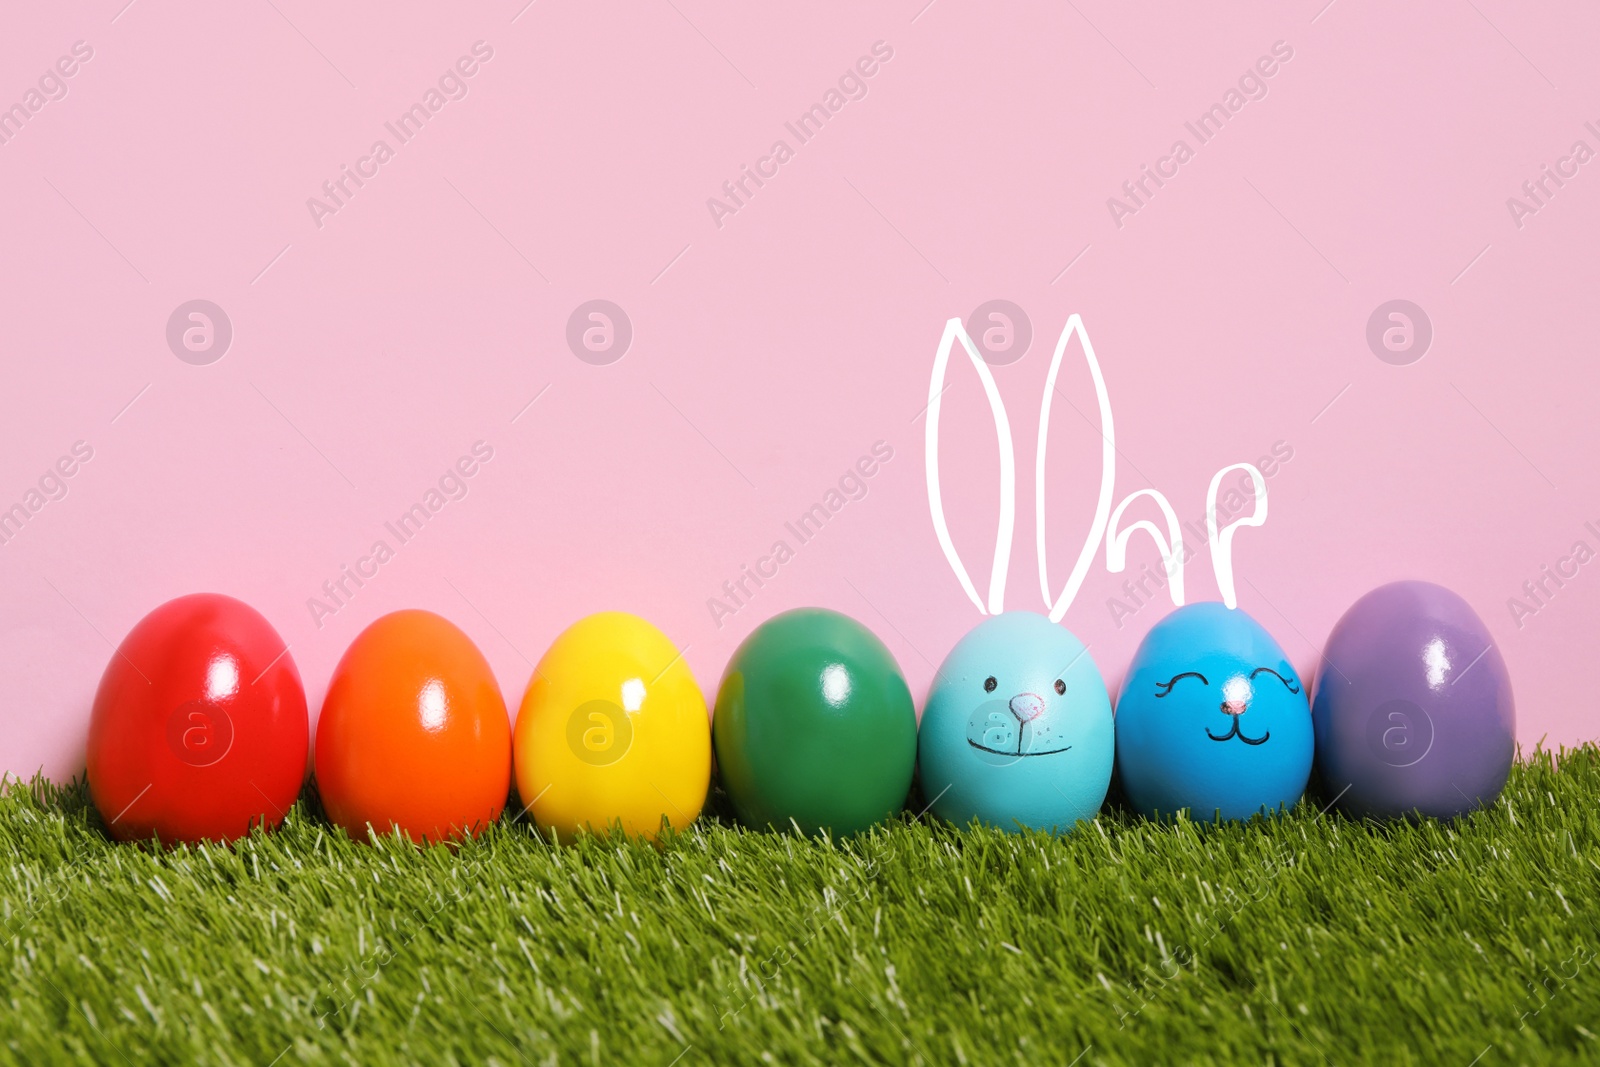 Image of Two eggs with drawn faces and ears as Easter bunnies among others on green grass against pink background